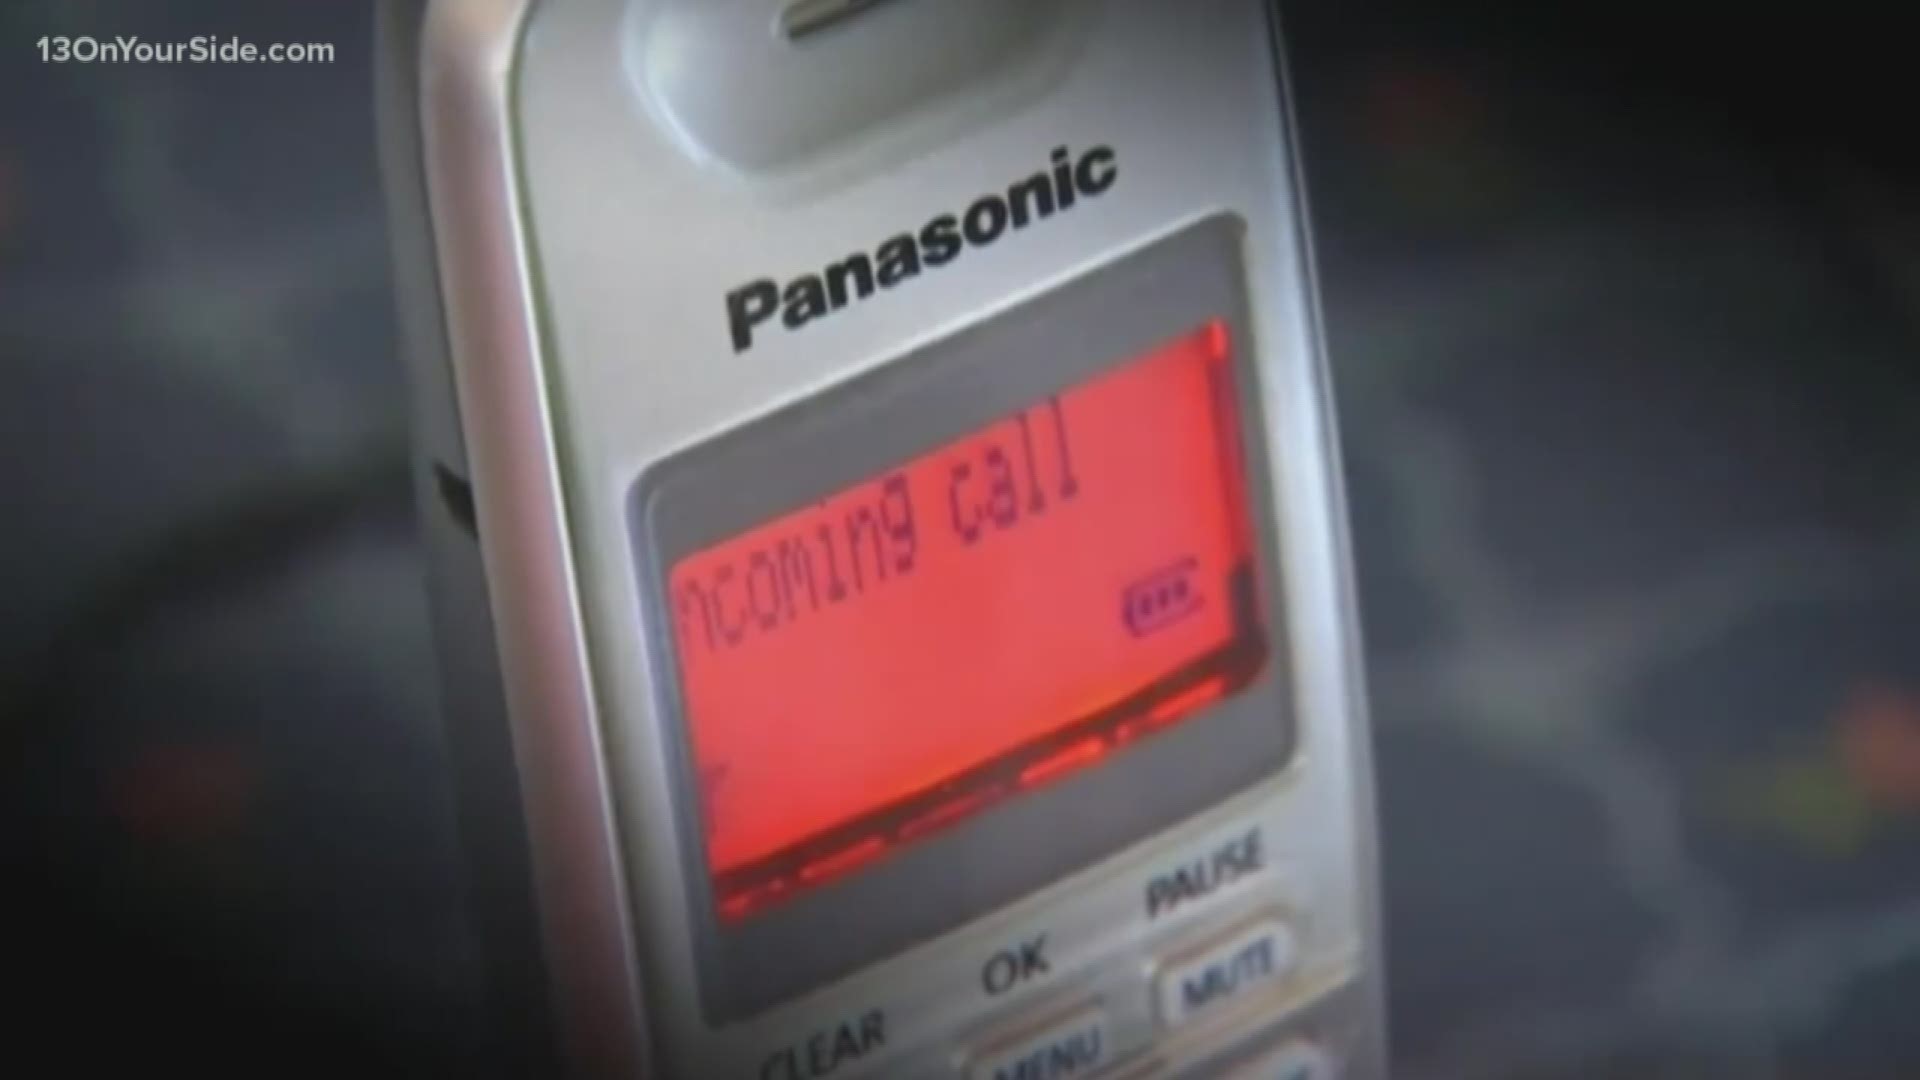 Grand Rapids received more than 10 million robocalls last month.